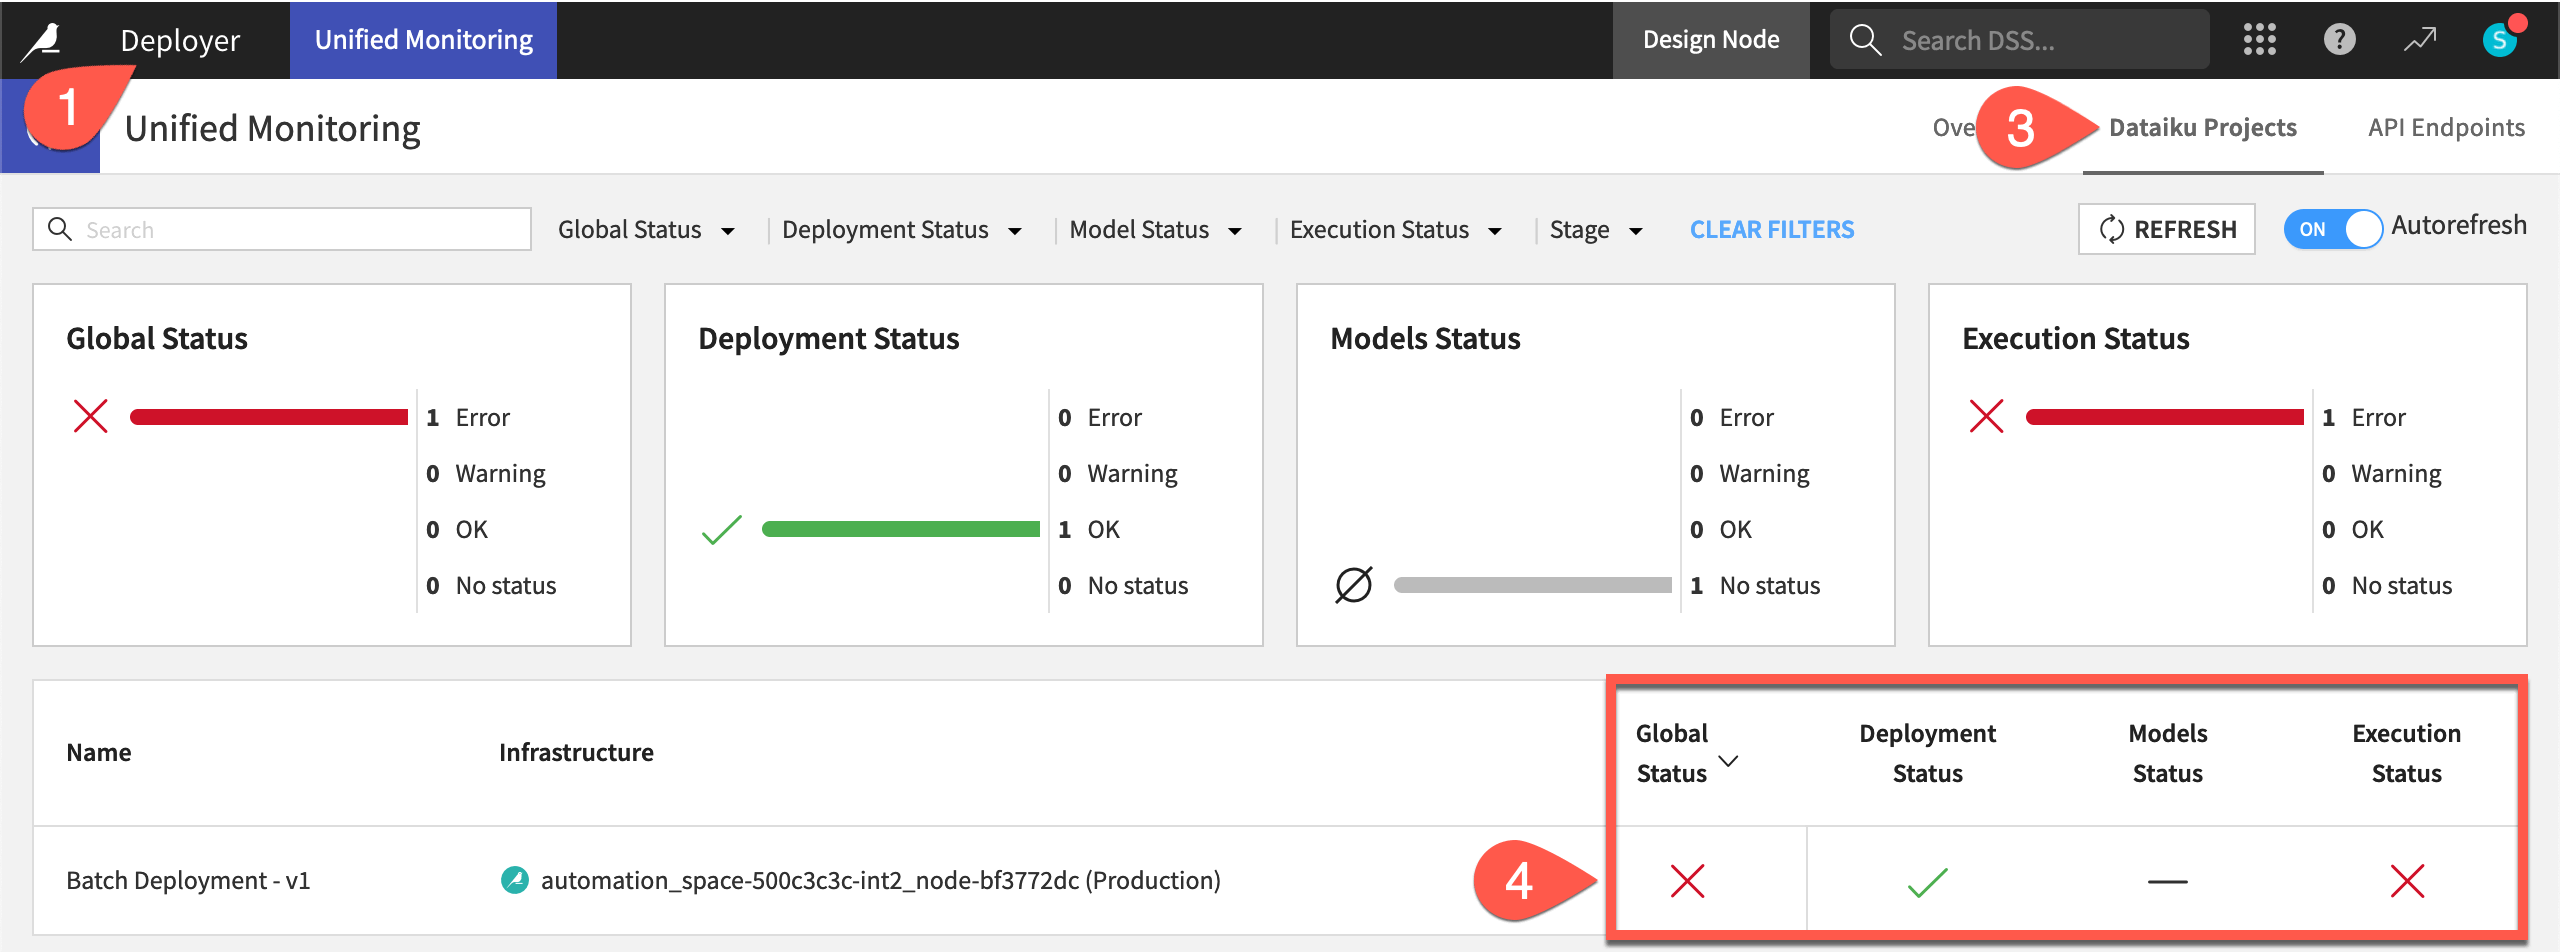 Dataiku screenshot of the projects tab of the unified monitoring page.